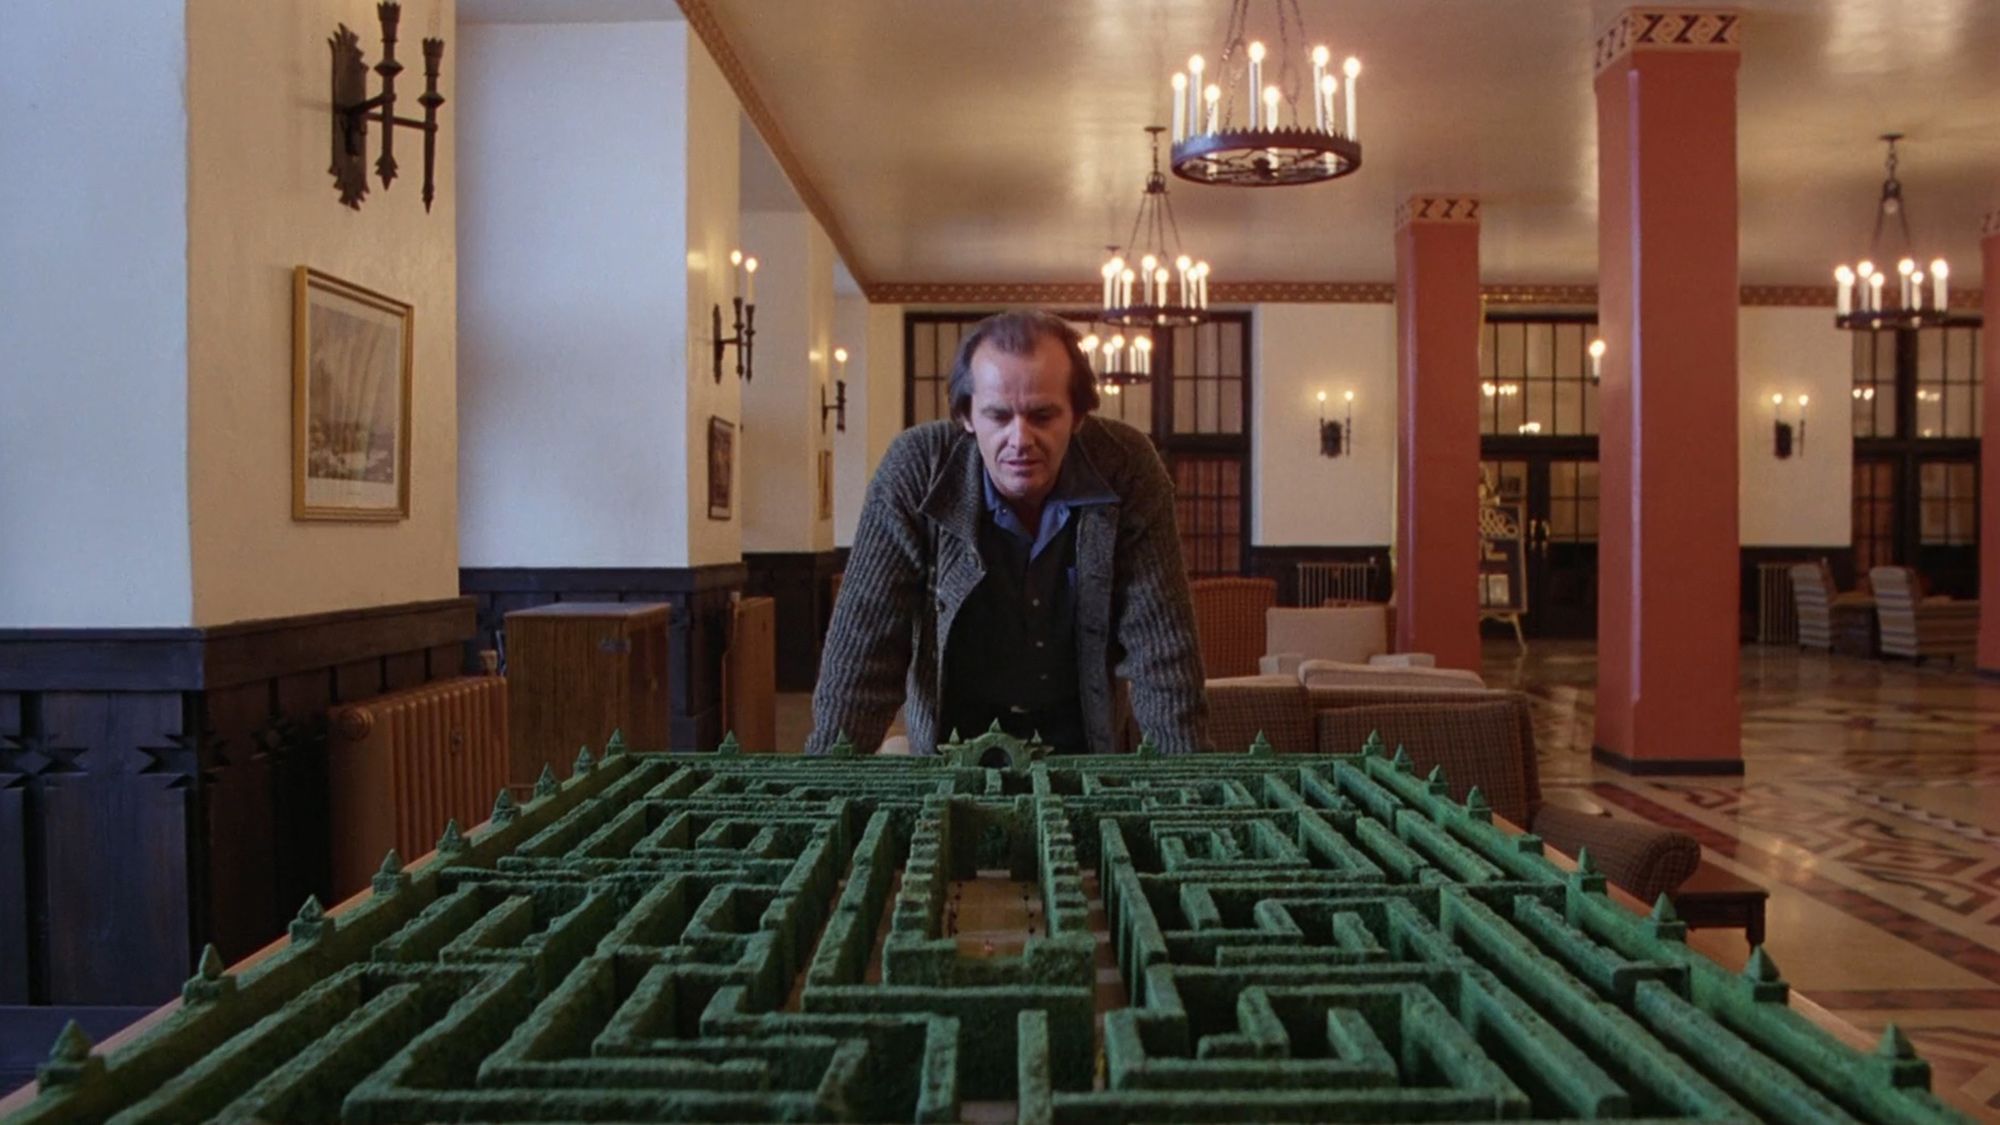 Here's every difference between The Shining book and the film